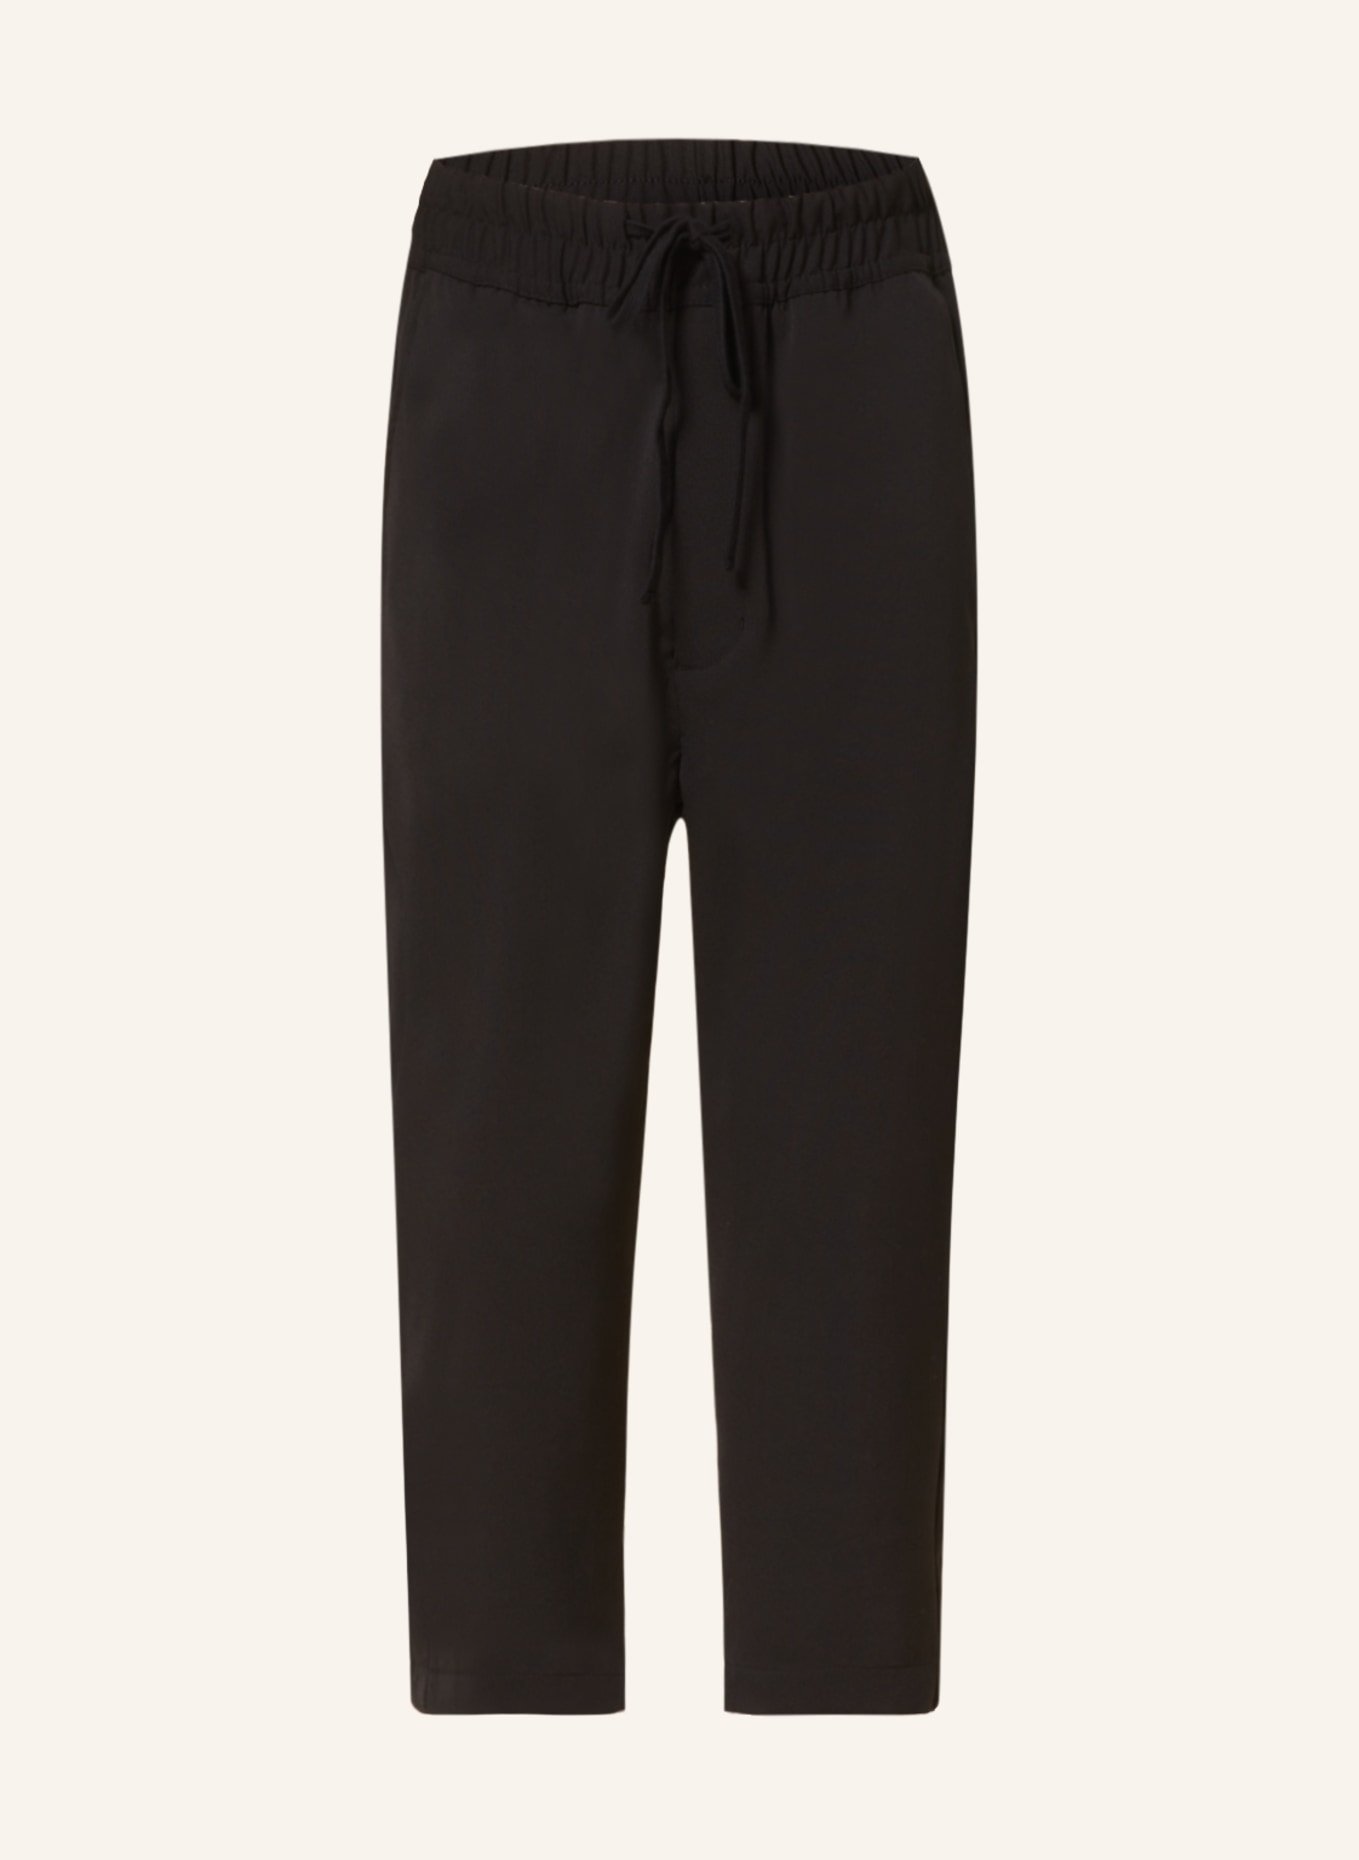 thom/krom Pants in jogger style slim fit, Color: BLACK (Image 1)